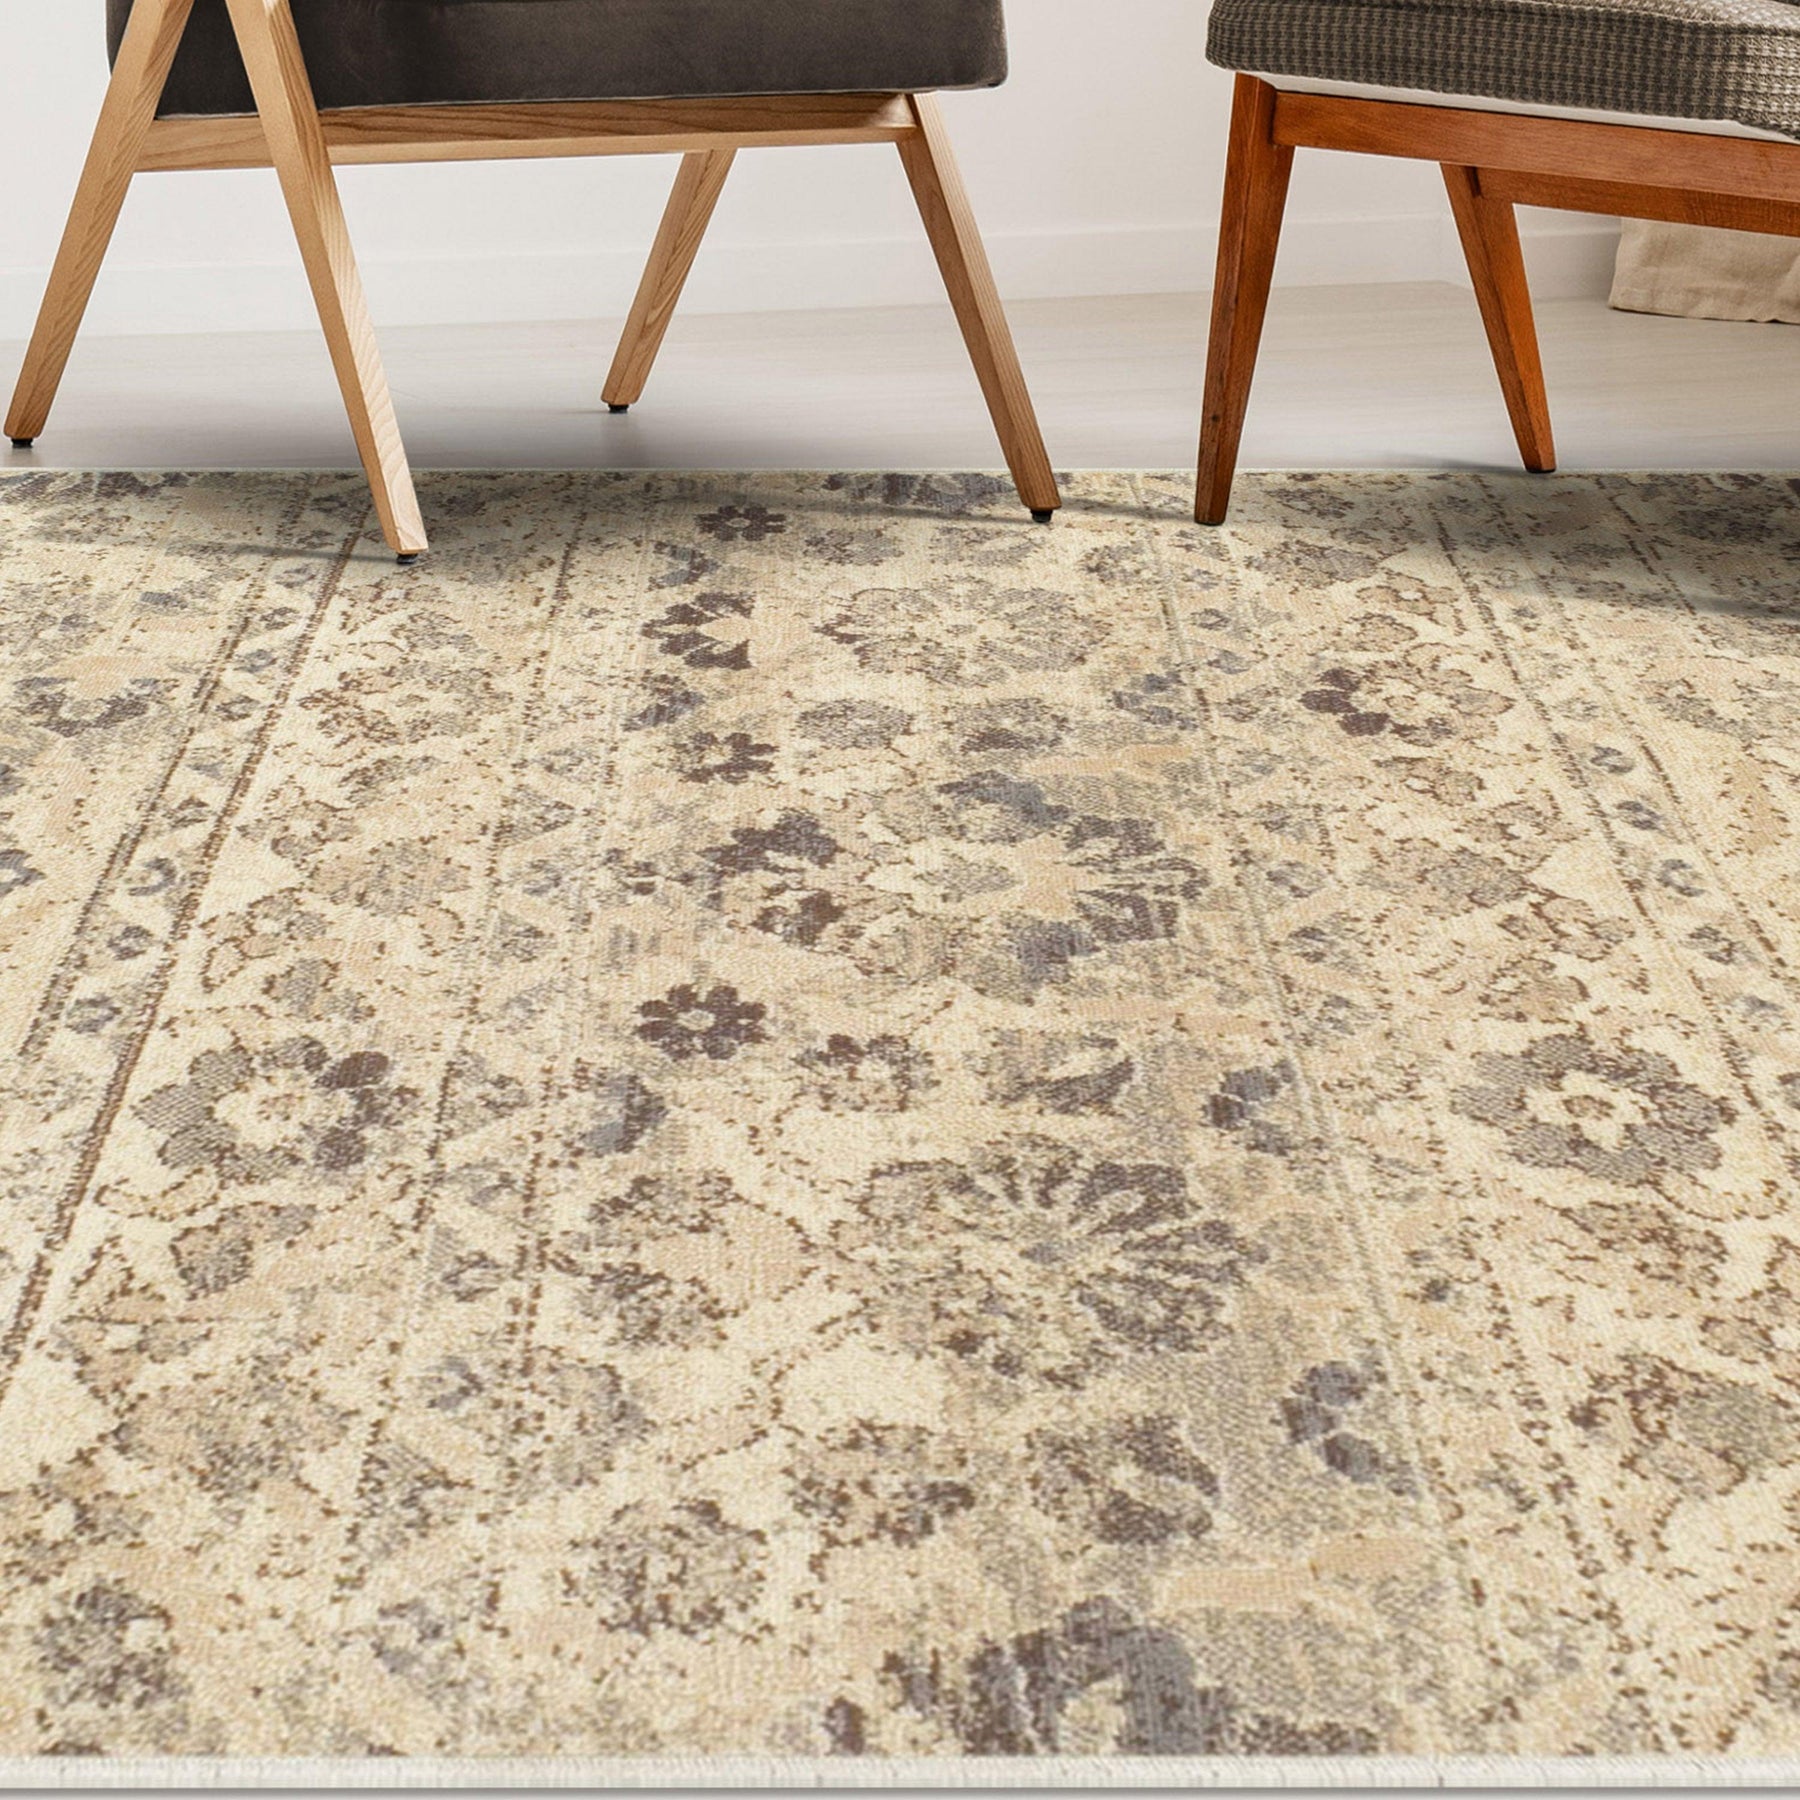  Superior Fawn Distressed Floral Stripes Area Rug - Beige